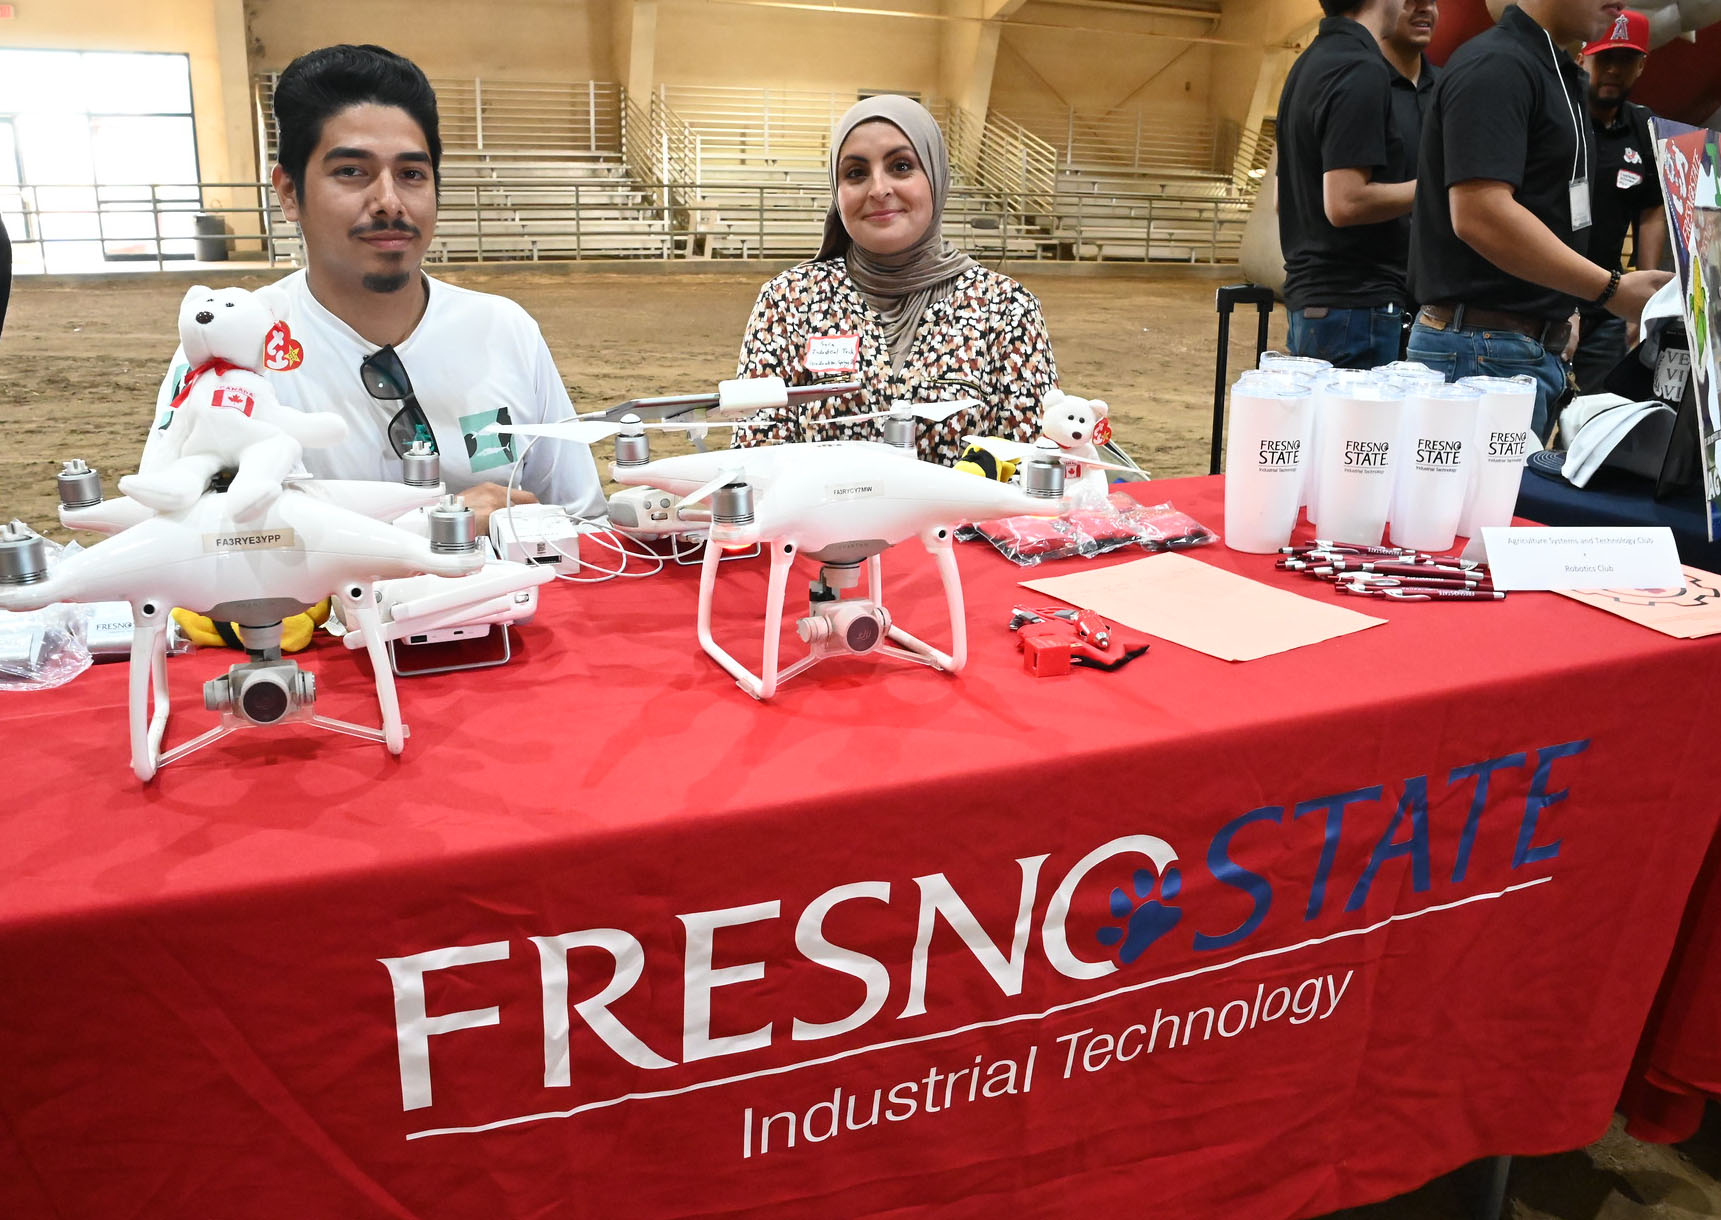 Sara Mekideche and Jose Pimentel at information table for Industrial Technology Department.